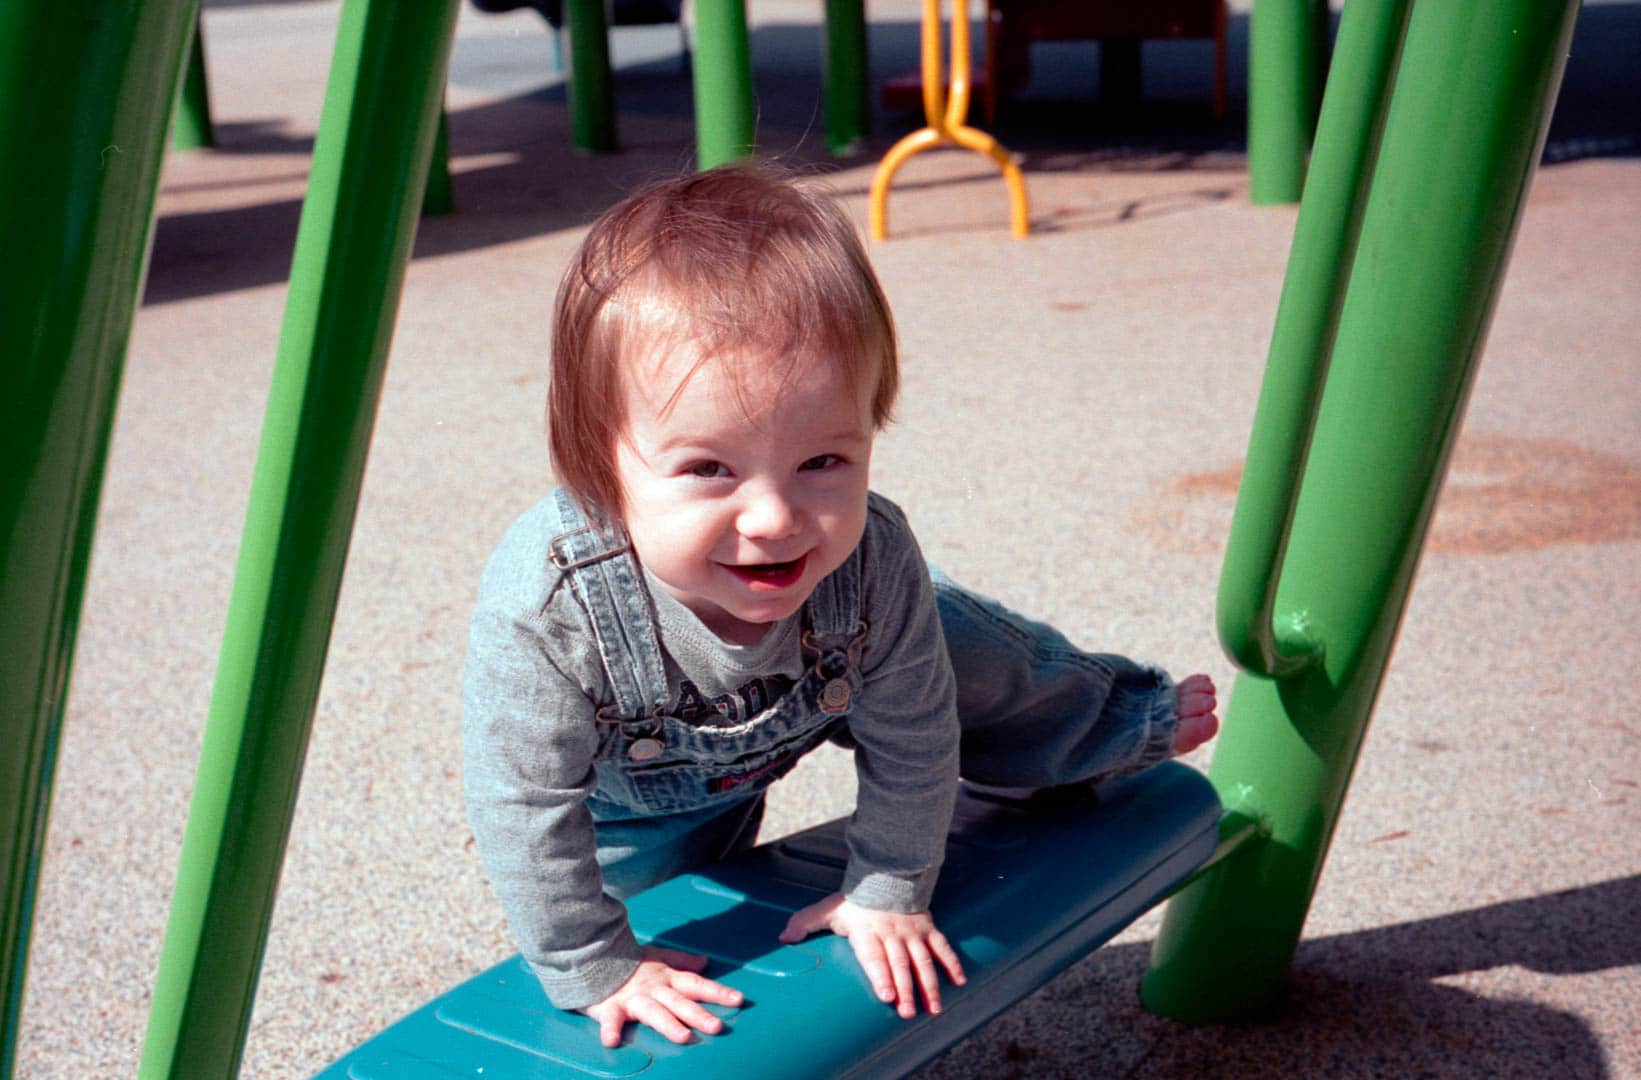 A young toddler climbs on a playground